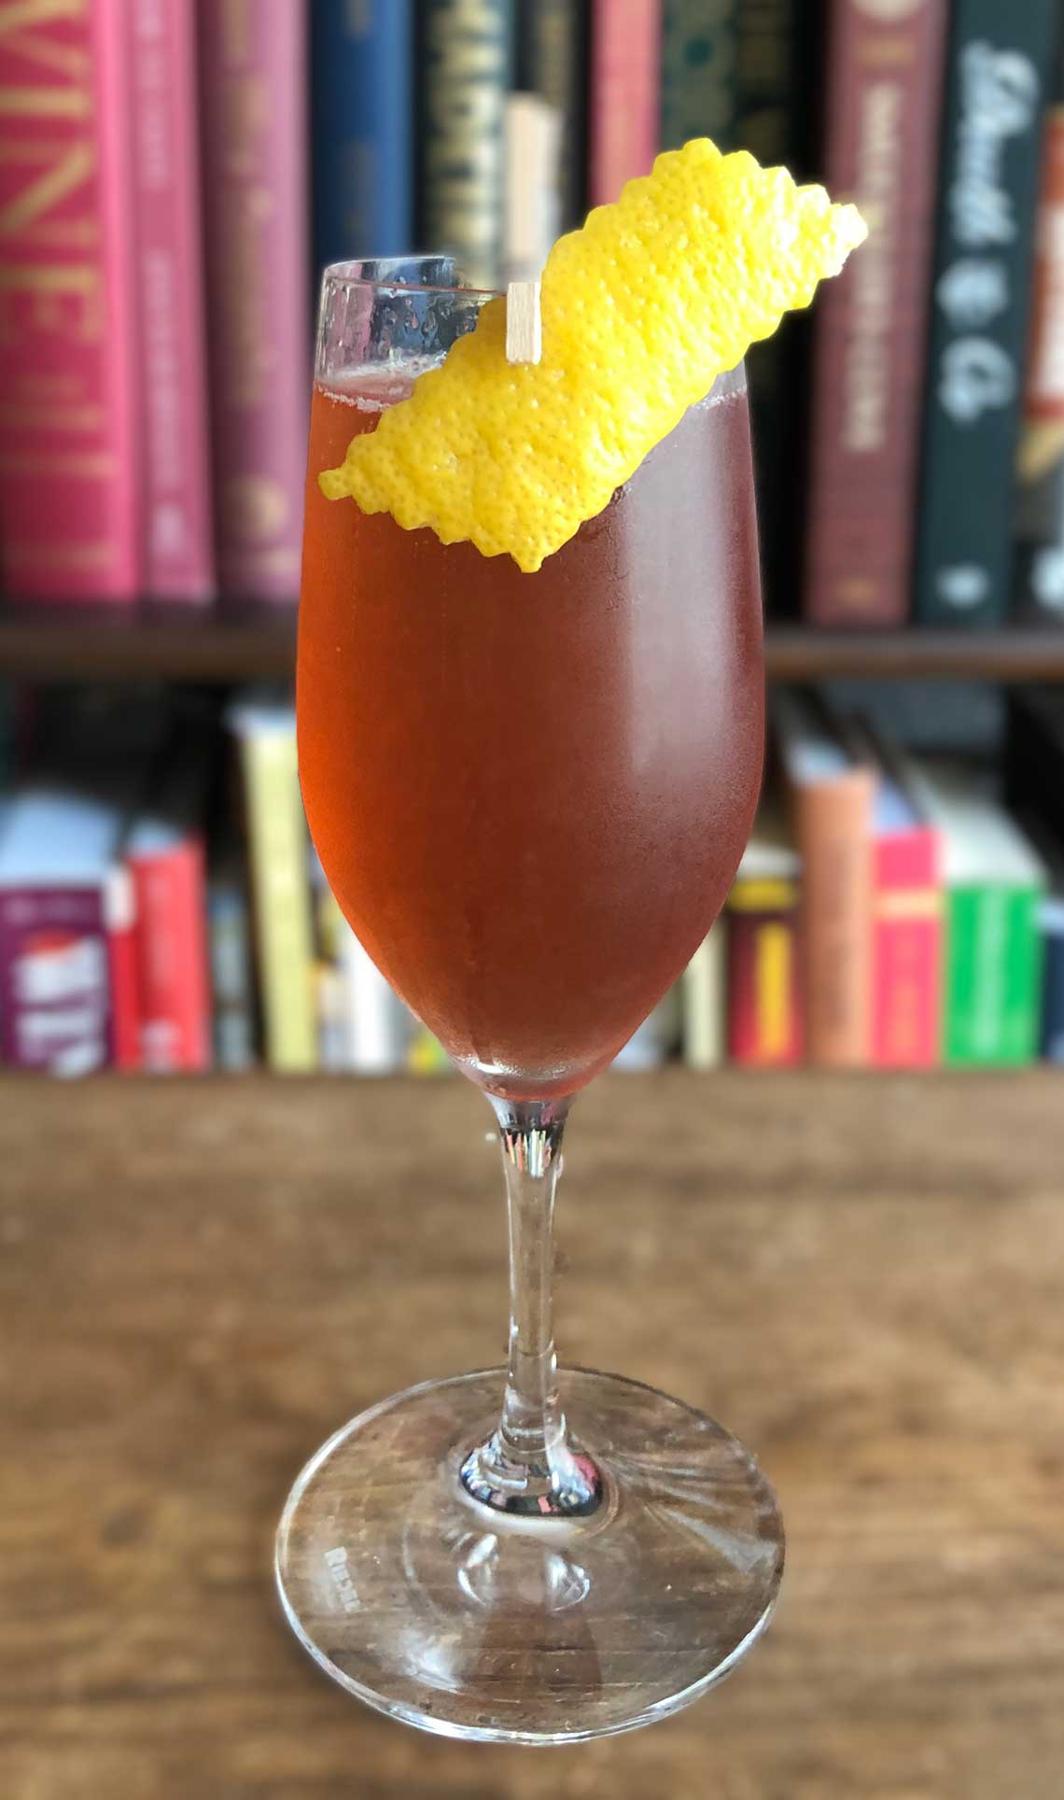 An example of the Damson Royale, the mixed drink (drink) featuring sparkling wine, Averell Damson Plum Gin Liqueur, lemon juice, and lemon twist; photo by Lee Edwards